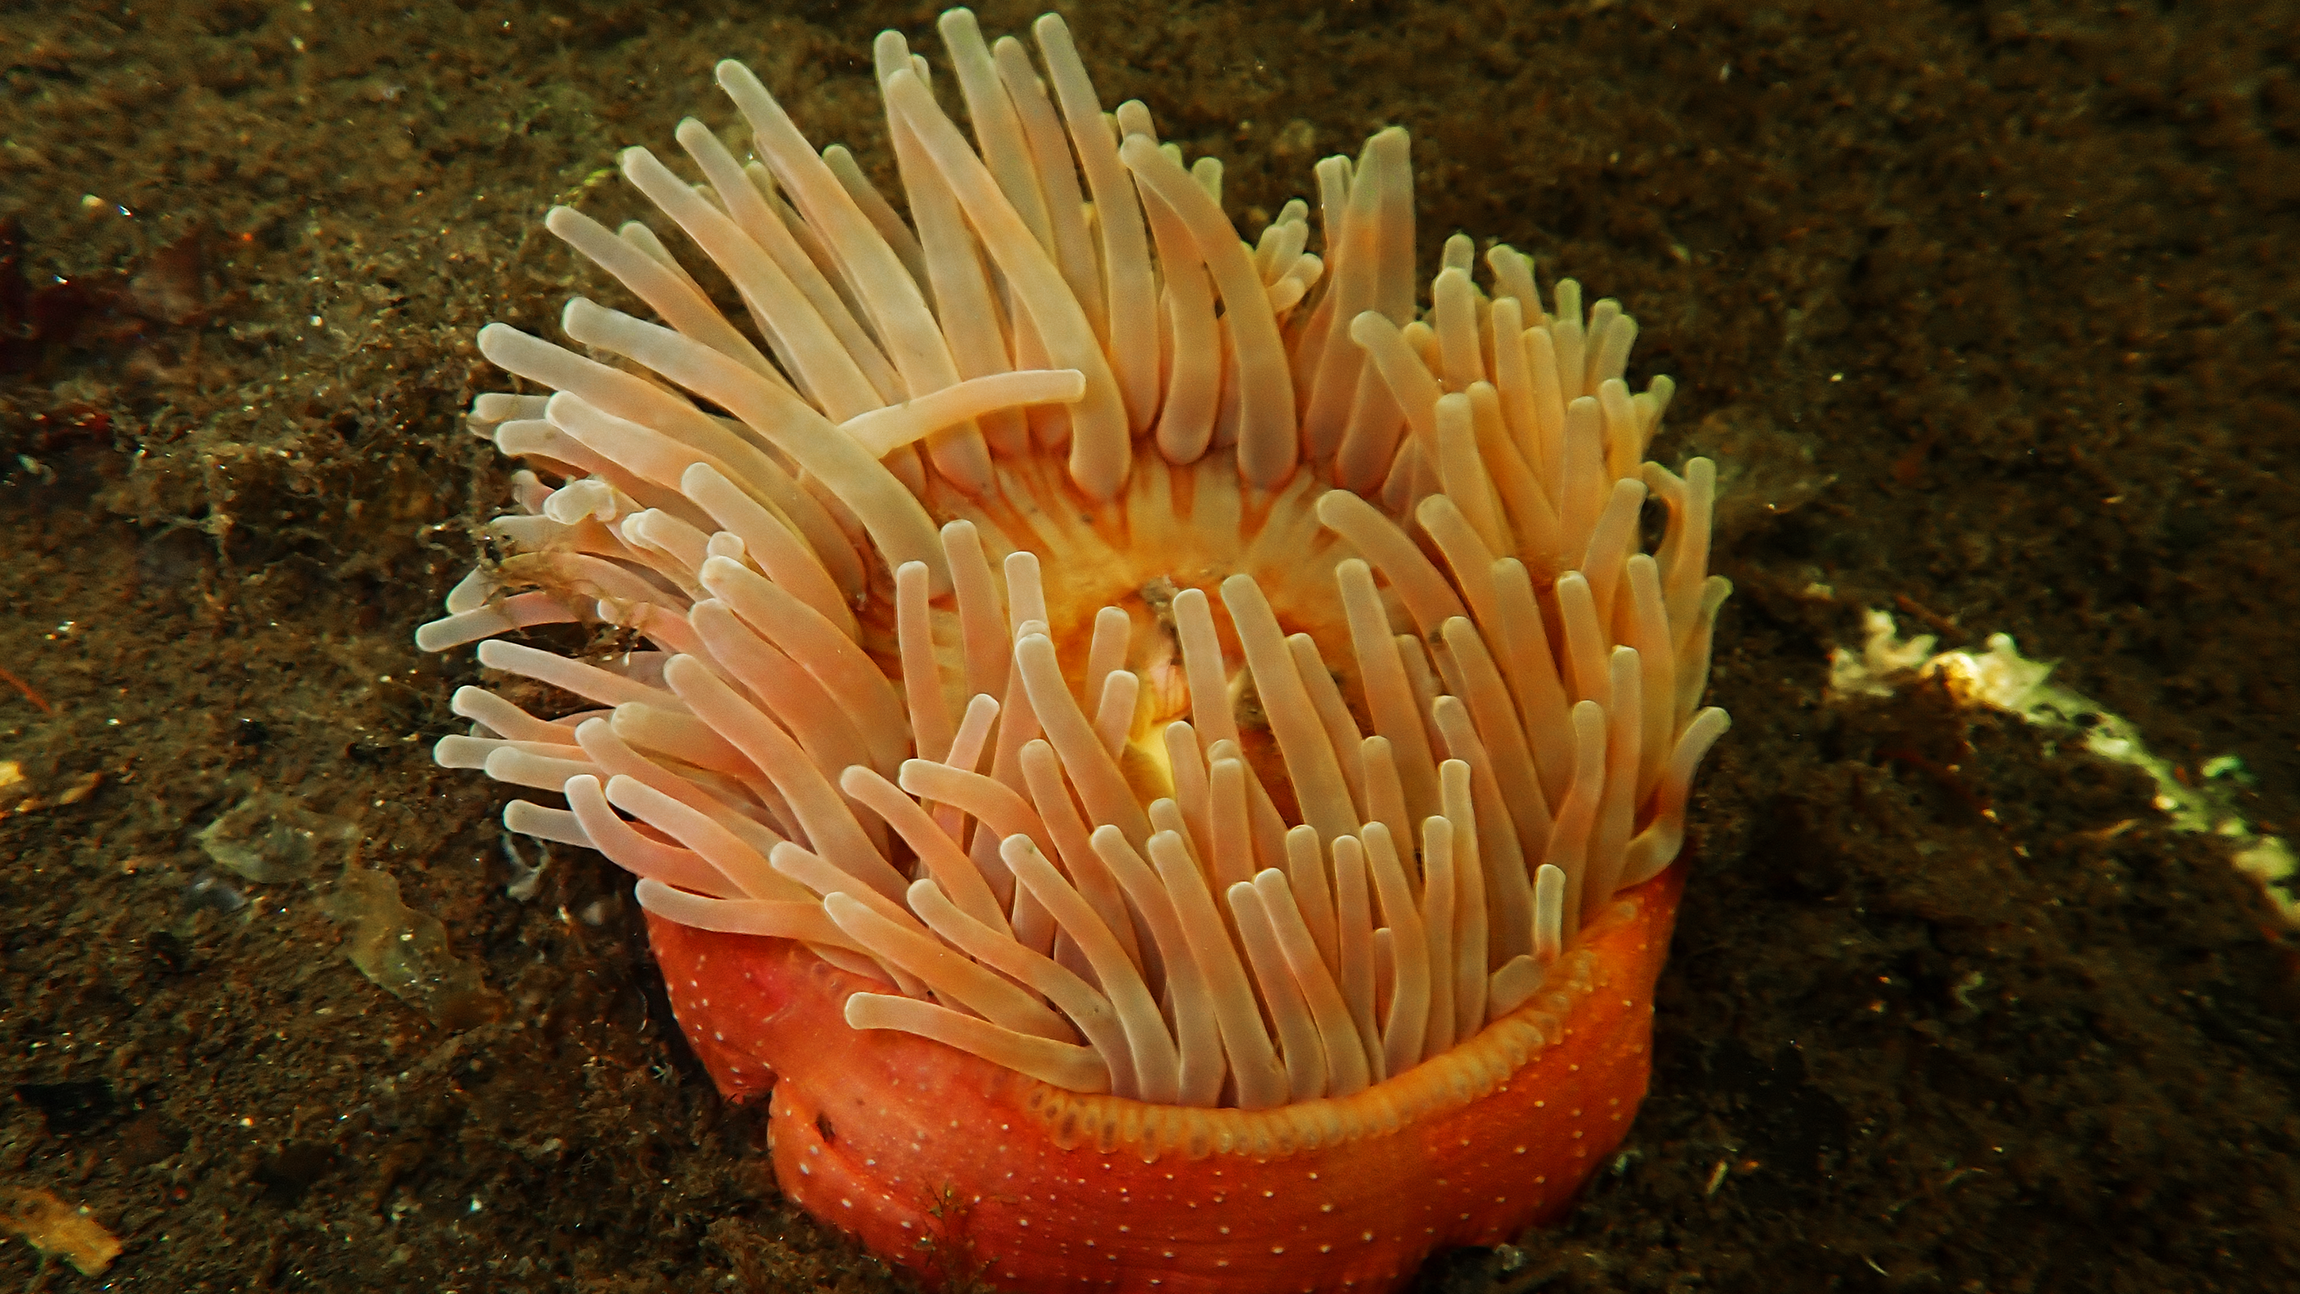 Underwater, a round anemone with a red speckled base and numerous beige-pinkish tentacles, which look like French fries, sits on a dark brown substrate.